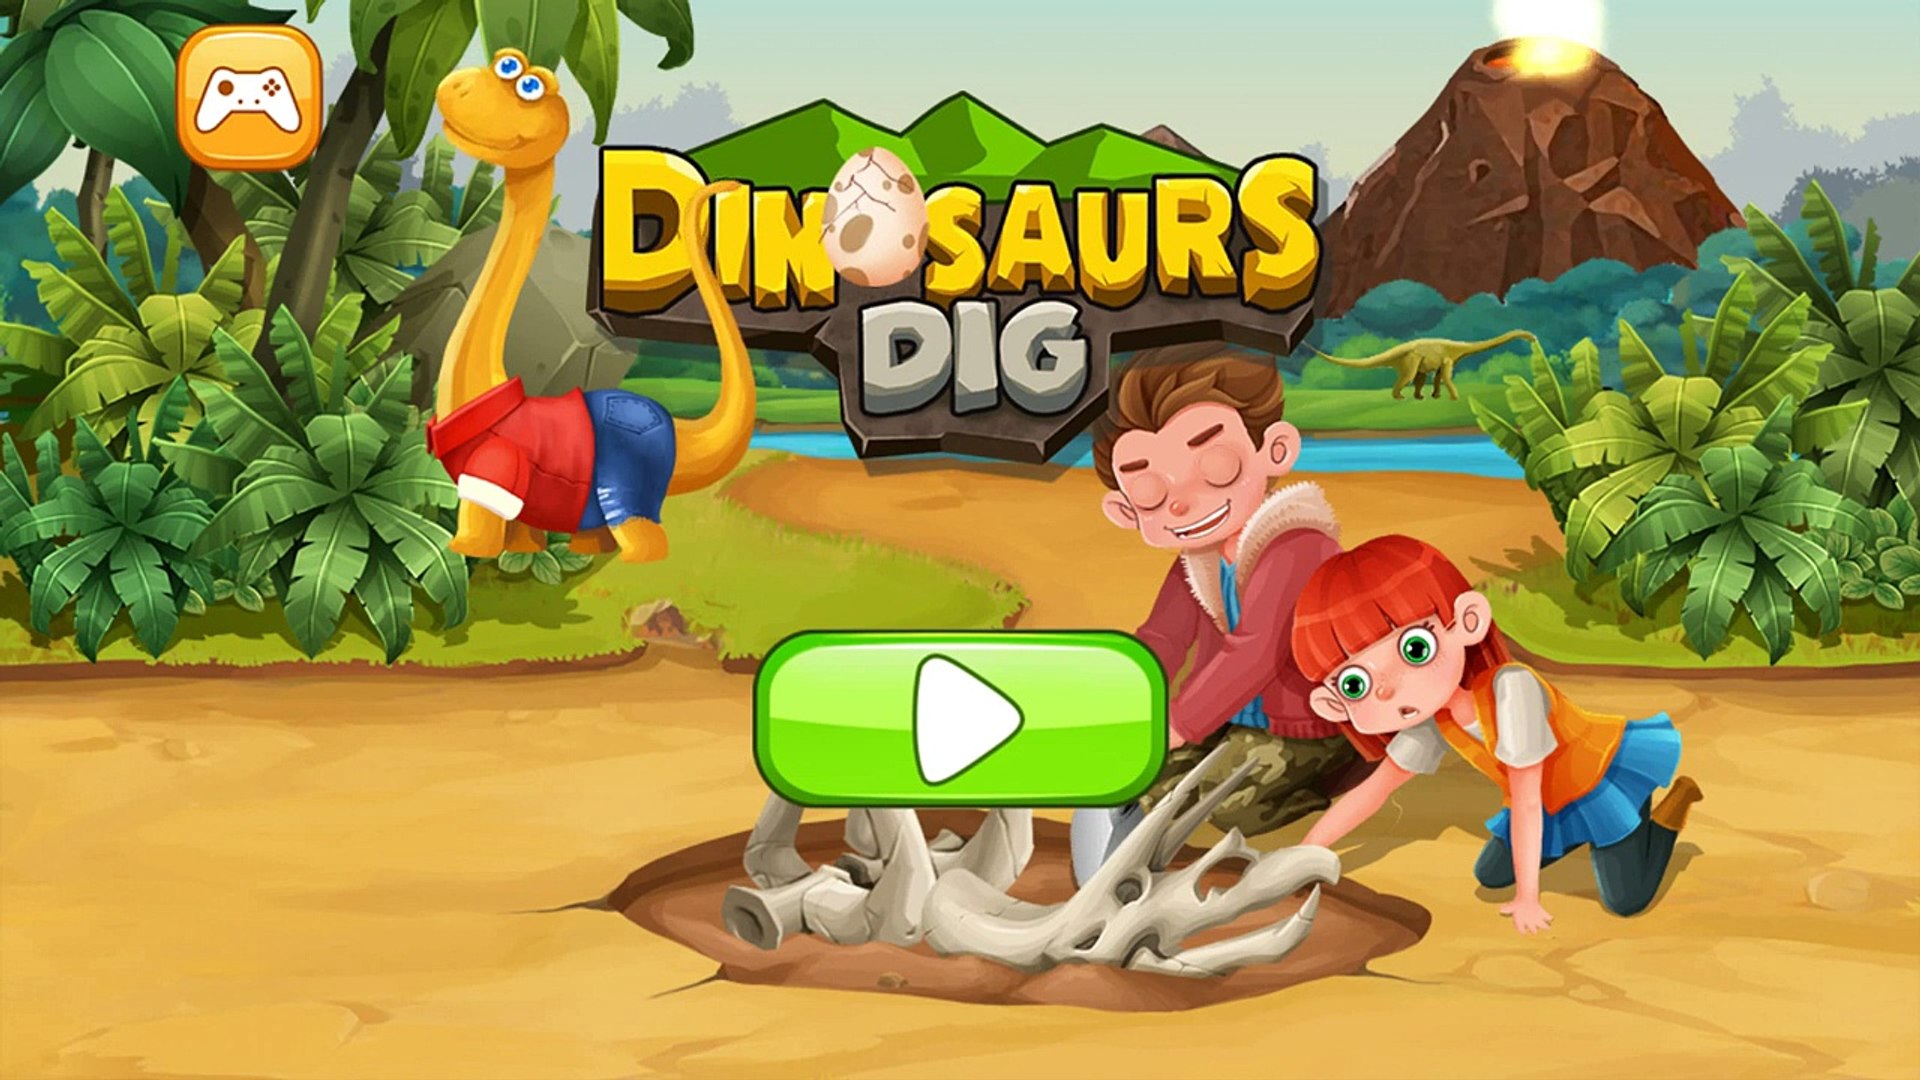 Jurassic World Dinosaurs - BabyBus Kids Games Education Android Gameplay Video